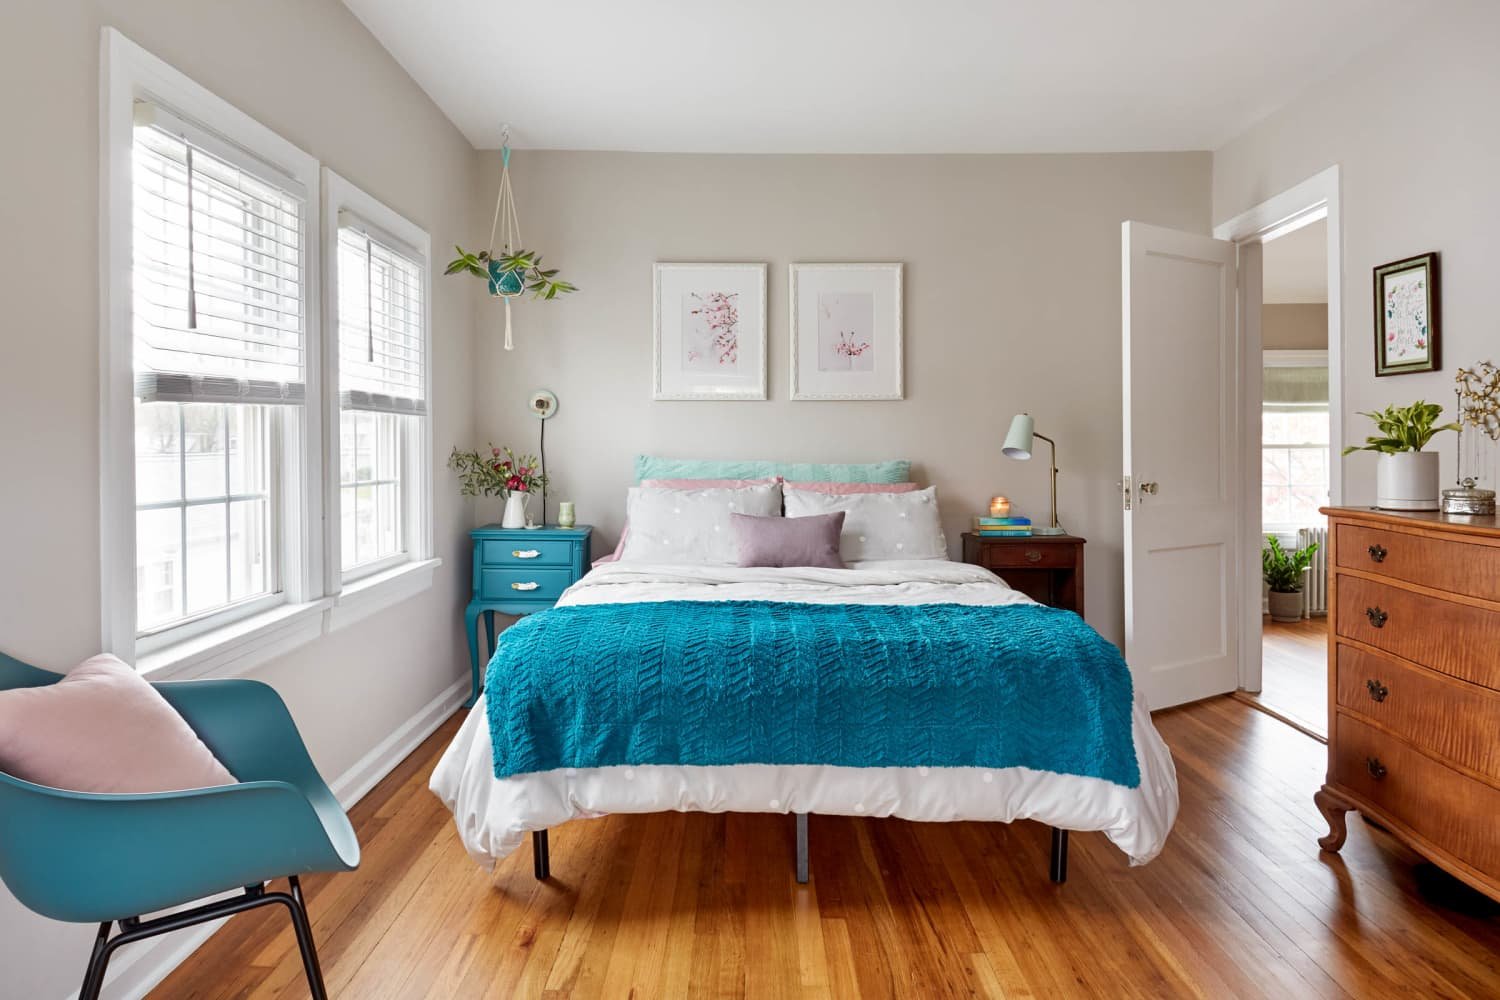 Follow These 10 Steps For a Cleaner Bedroom This Weekend